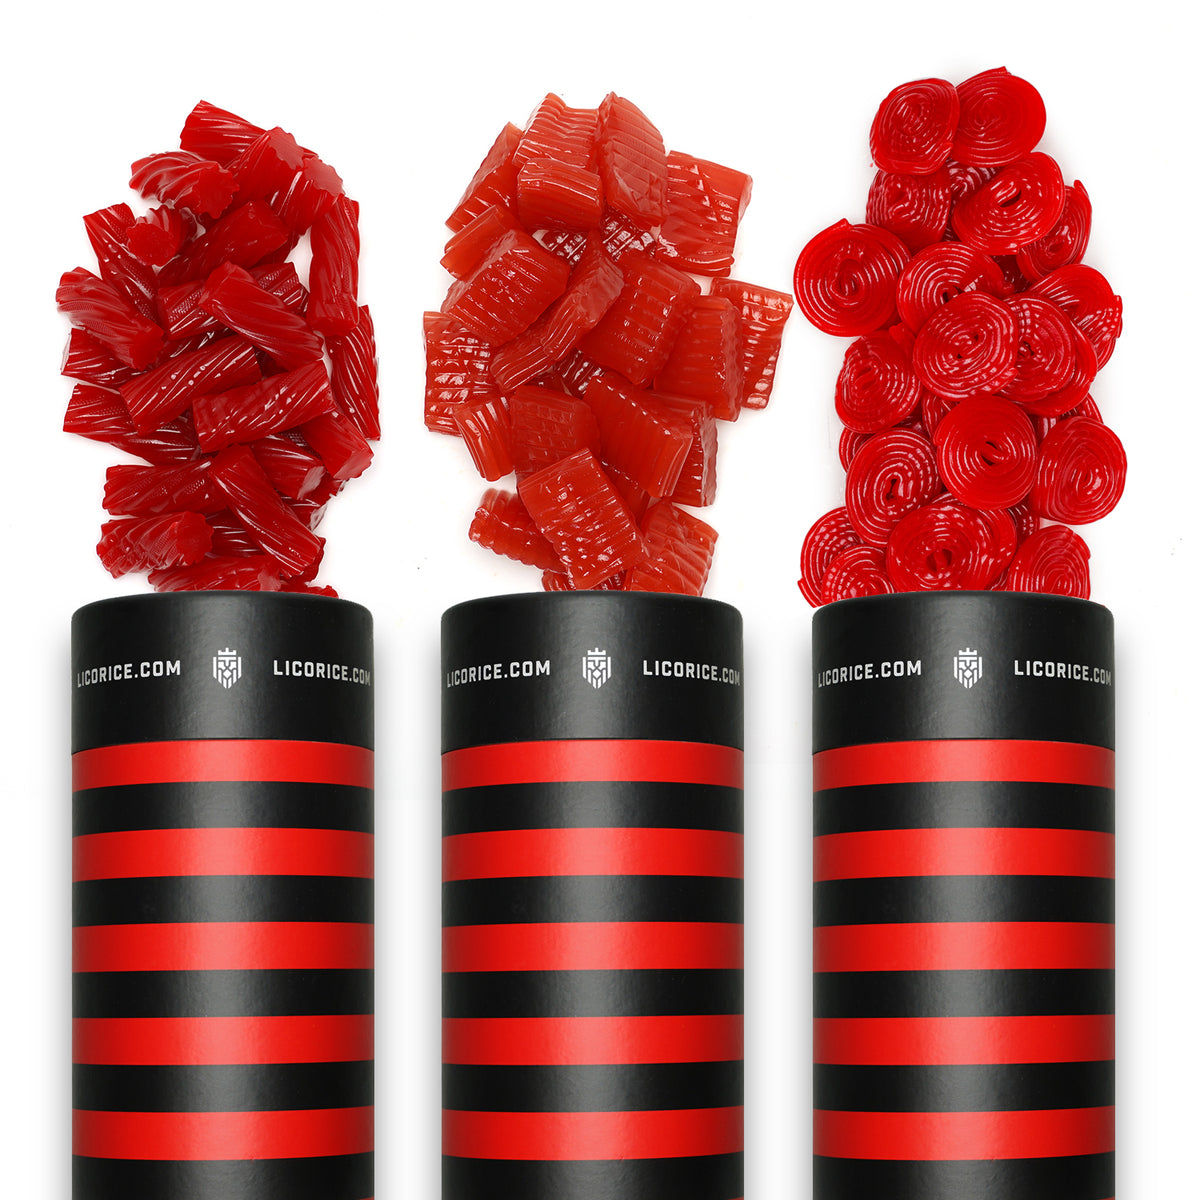 The Red Licorice Lover